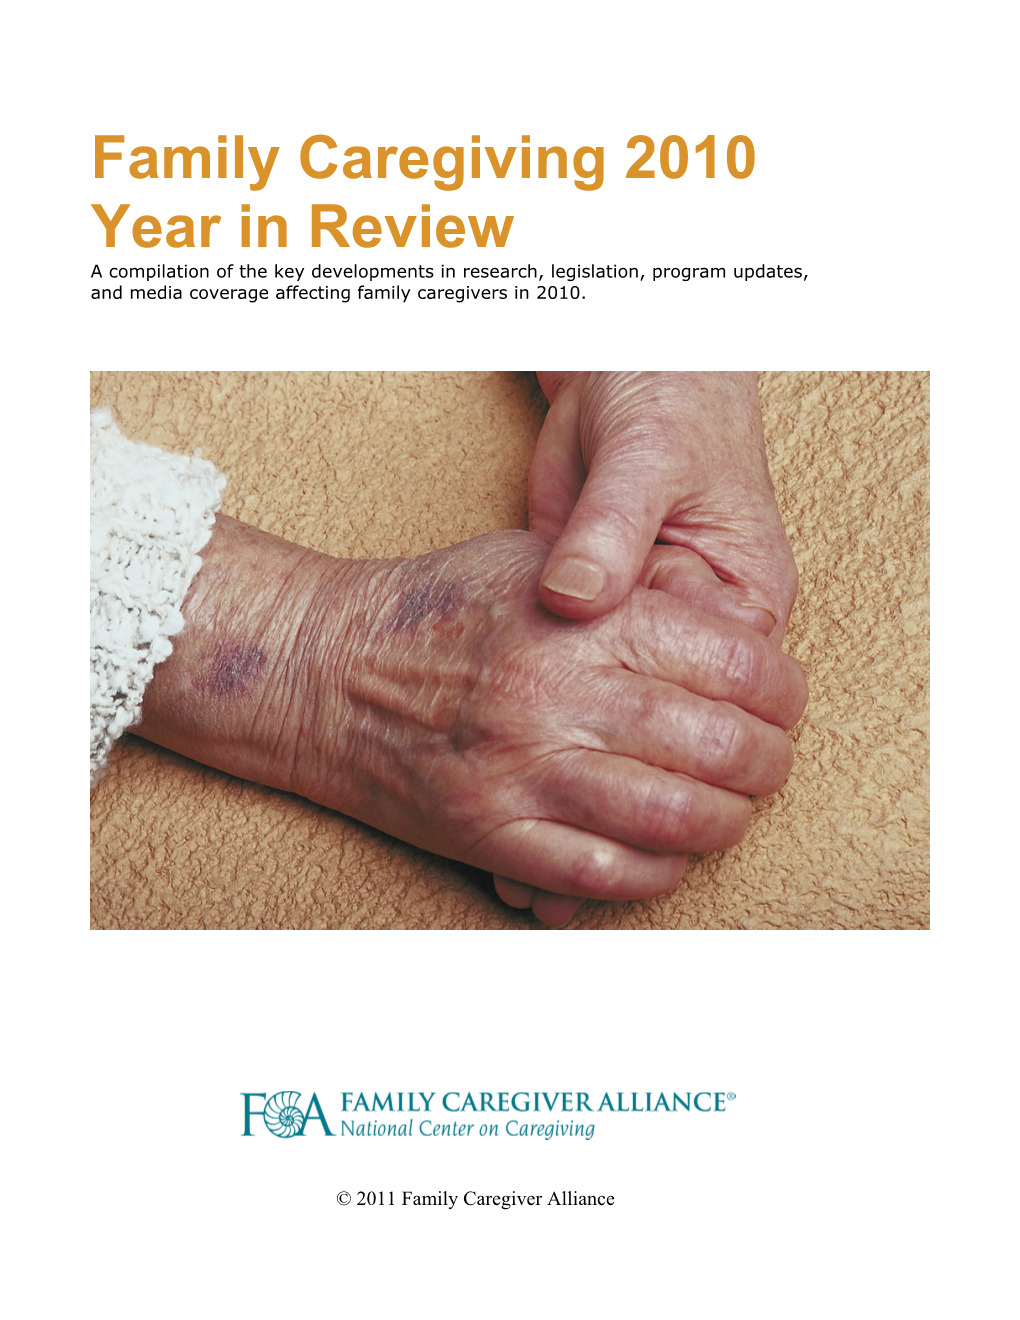 Family Caregiver Alliance Proudly Presents Our First Annual “Year In